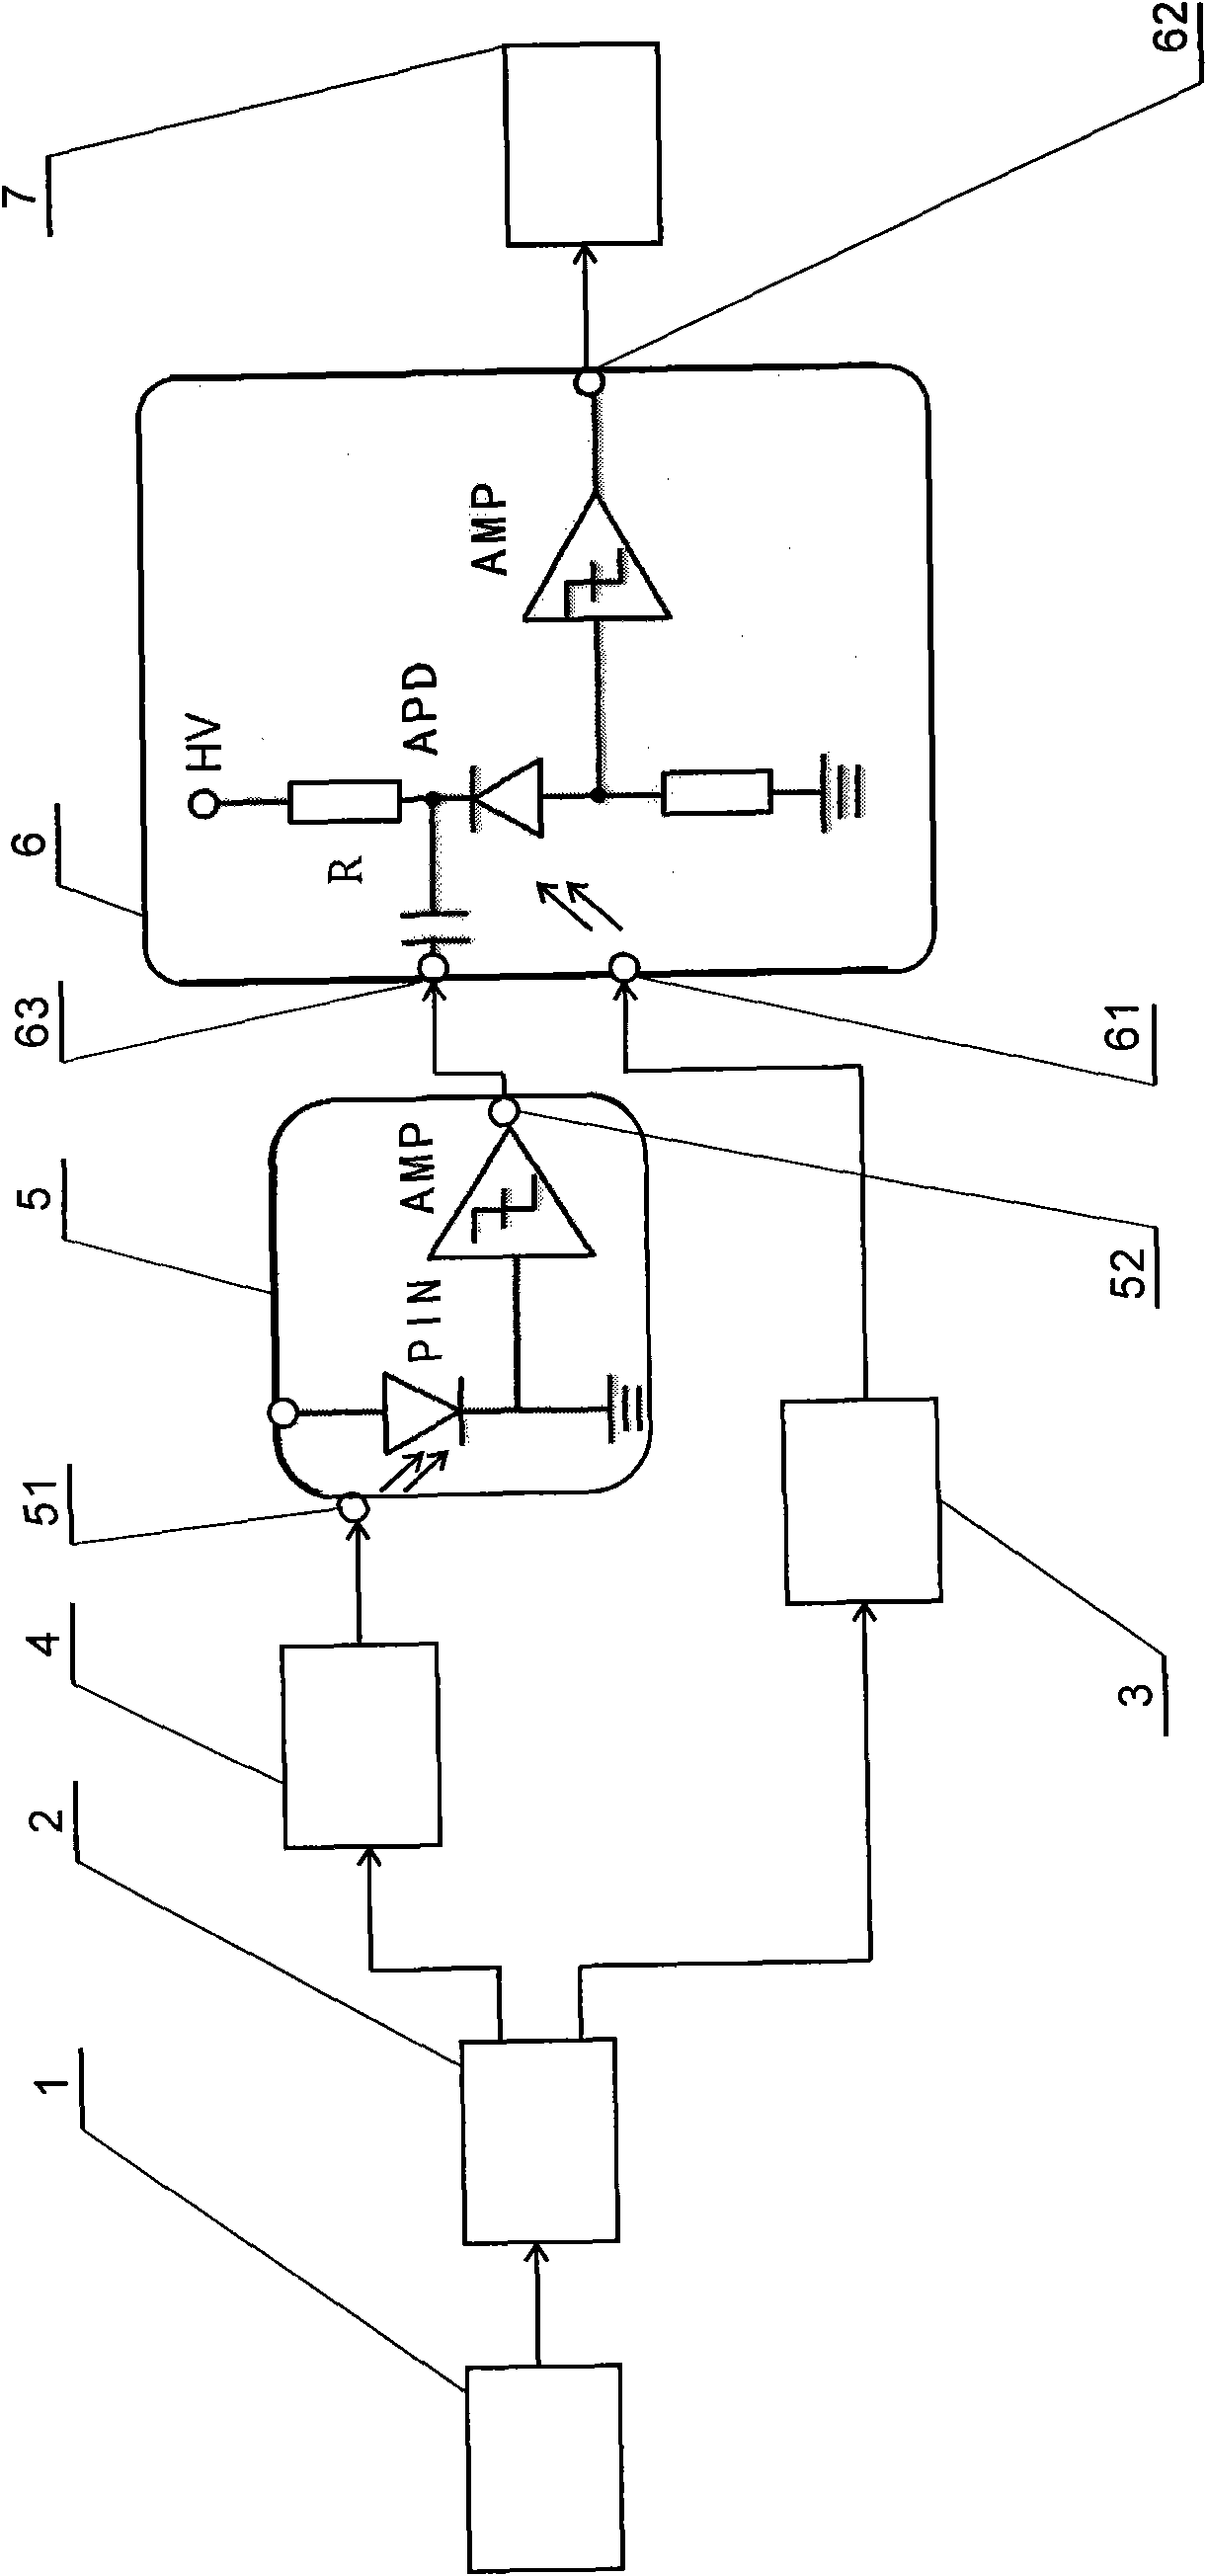 High time resolution low noise single photon detector based on optical pulse synchronization